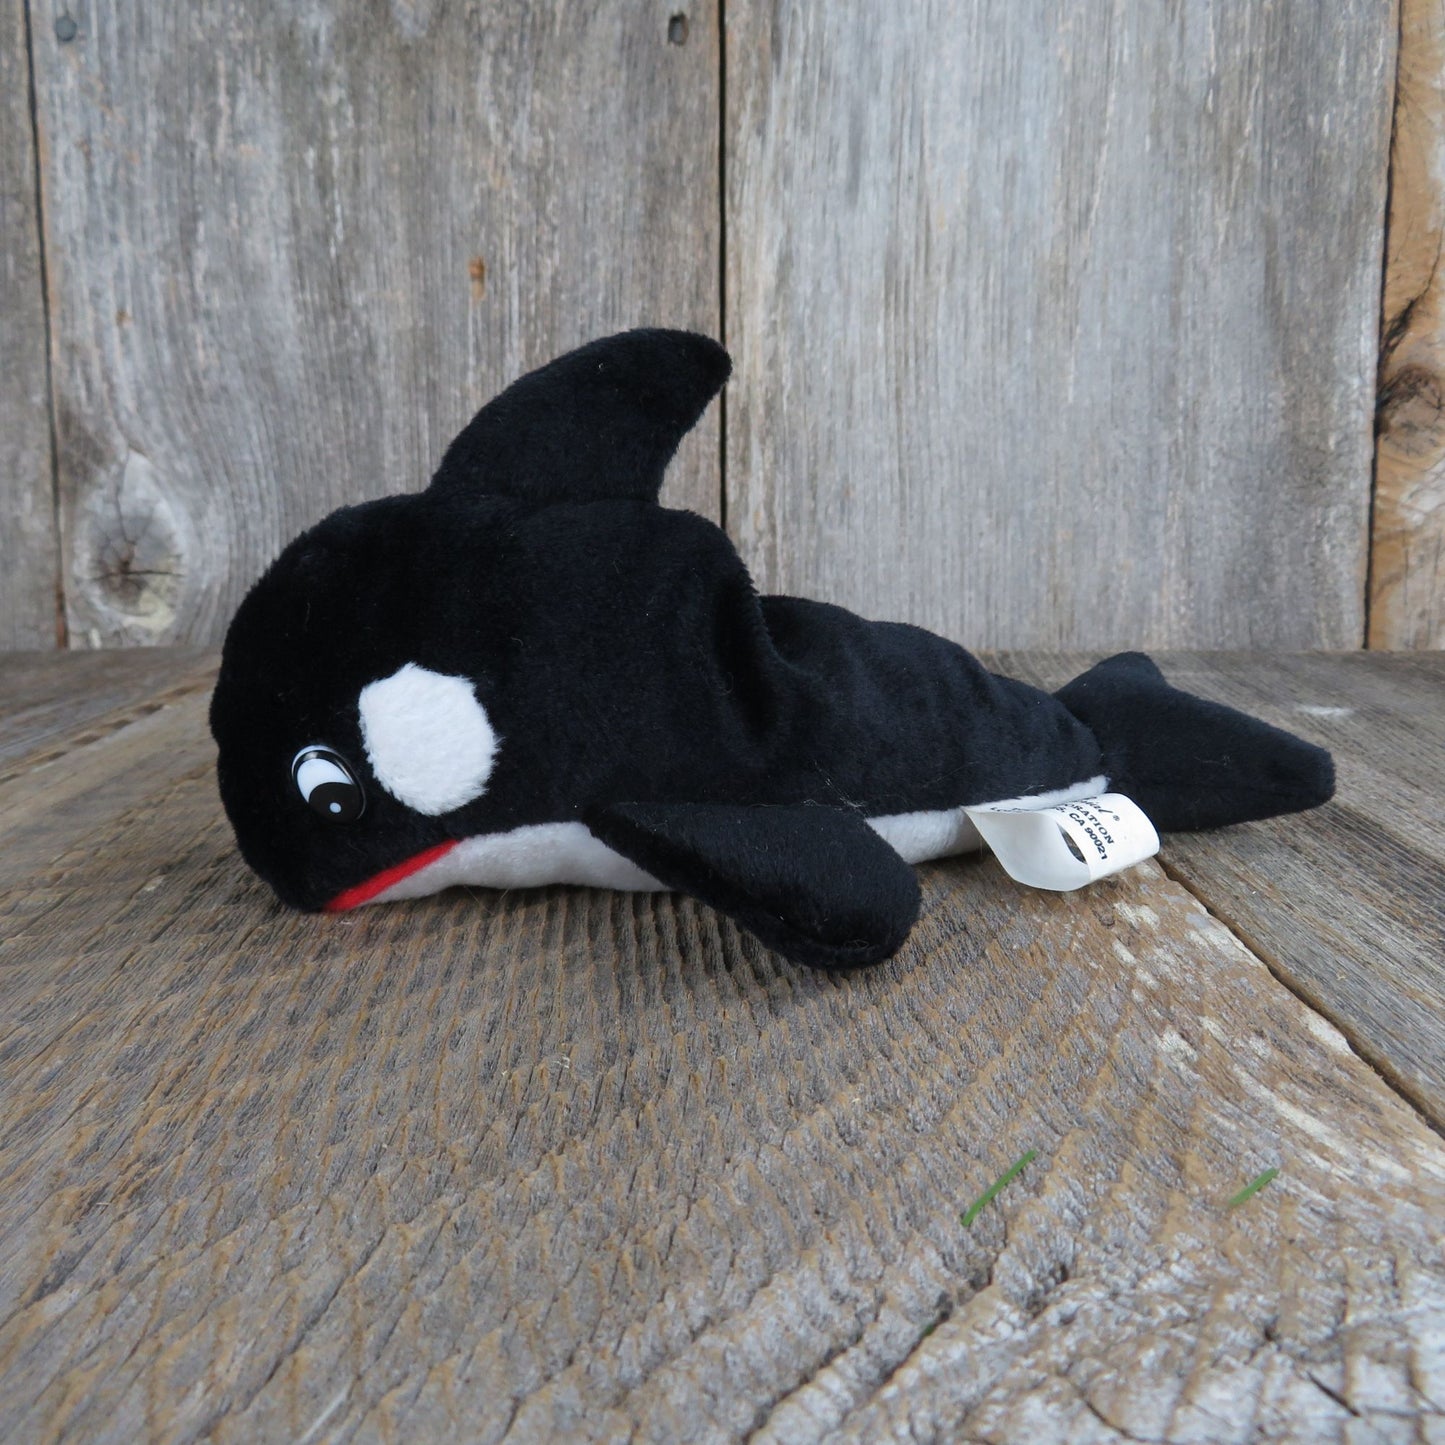 Whale Plush Orca Killer Whale Stuffed Animal Weighted Imperial Toys Bean Bag Black and White